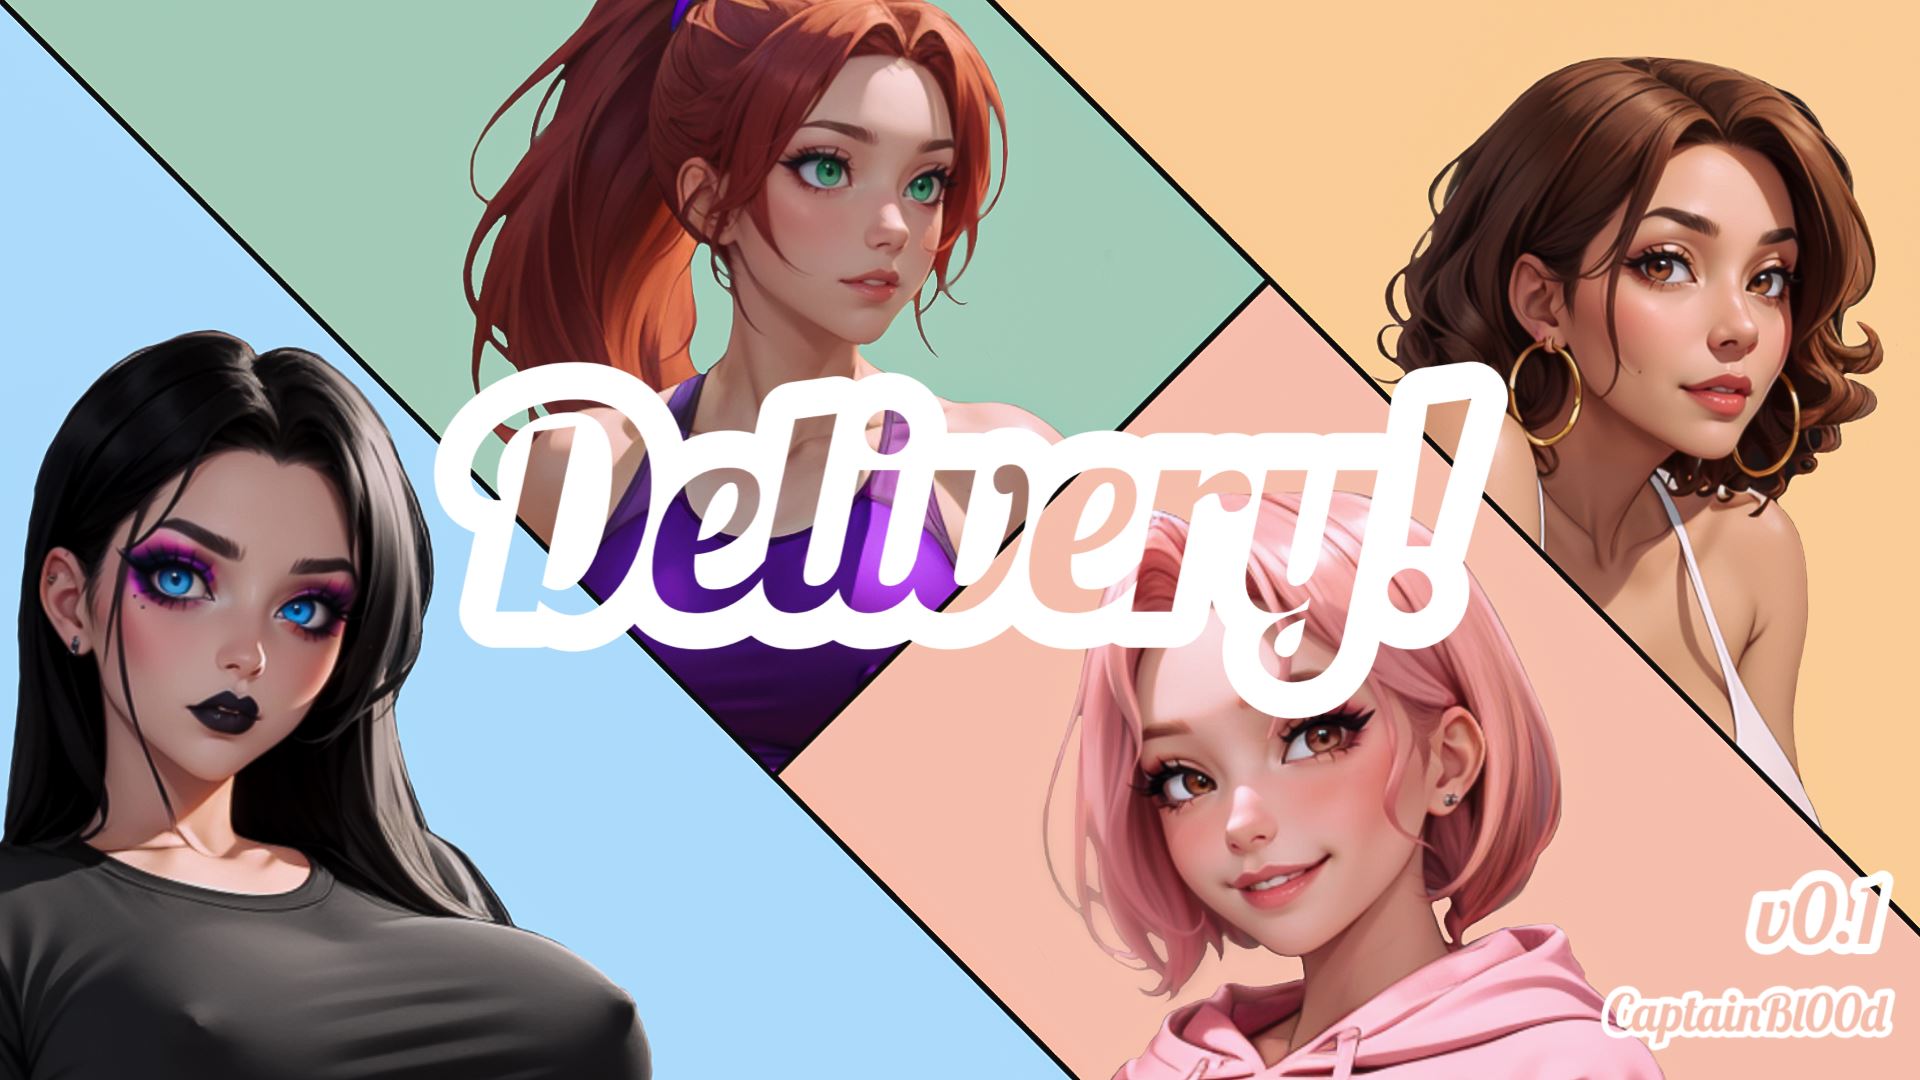 Delivery! [Ongoing] - Version: 0.5